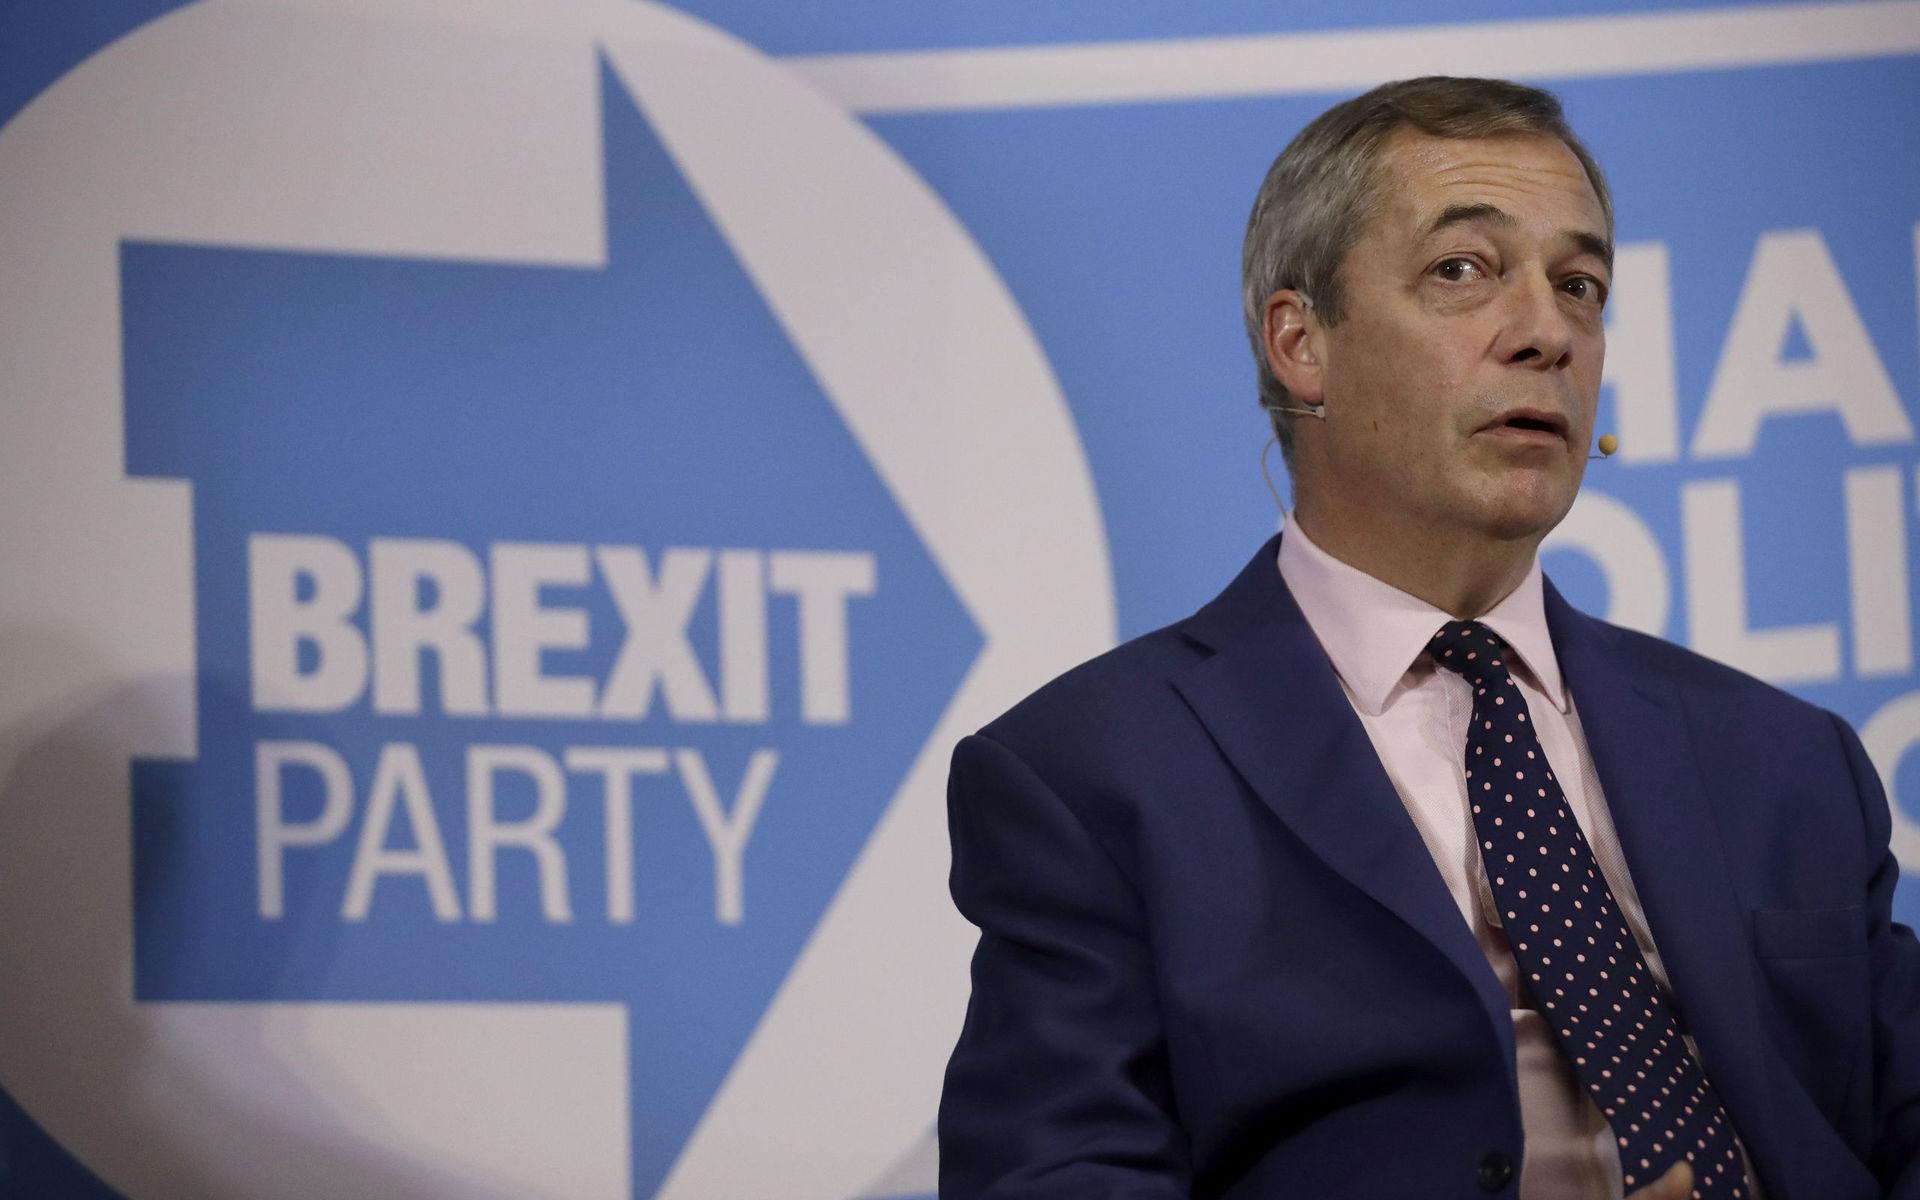 Nigel Farage the leader of the Brexit Party takes questions from journalists during an election press conference in London, Tuesday, Dec. 10, 2019. Britain goes to the polls on Dec. 12. (AP Photo/Matt Dunham)  LMD102